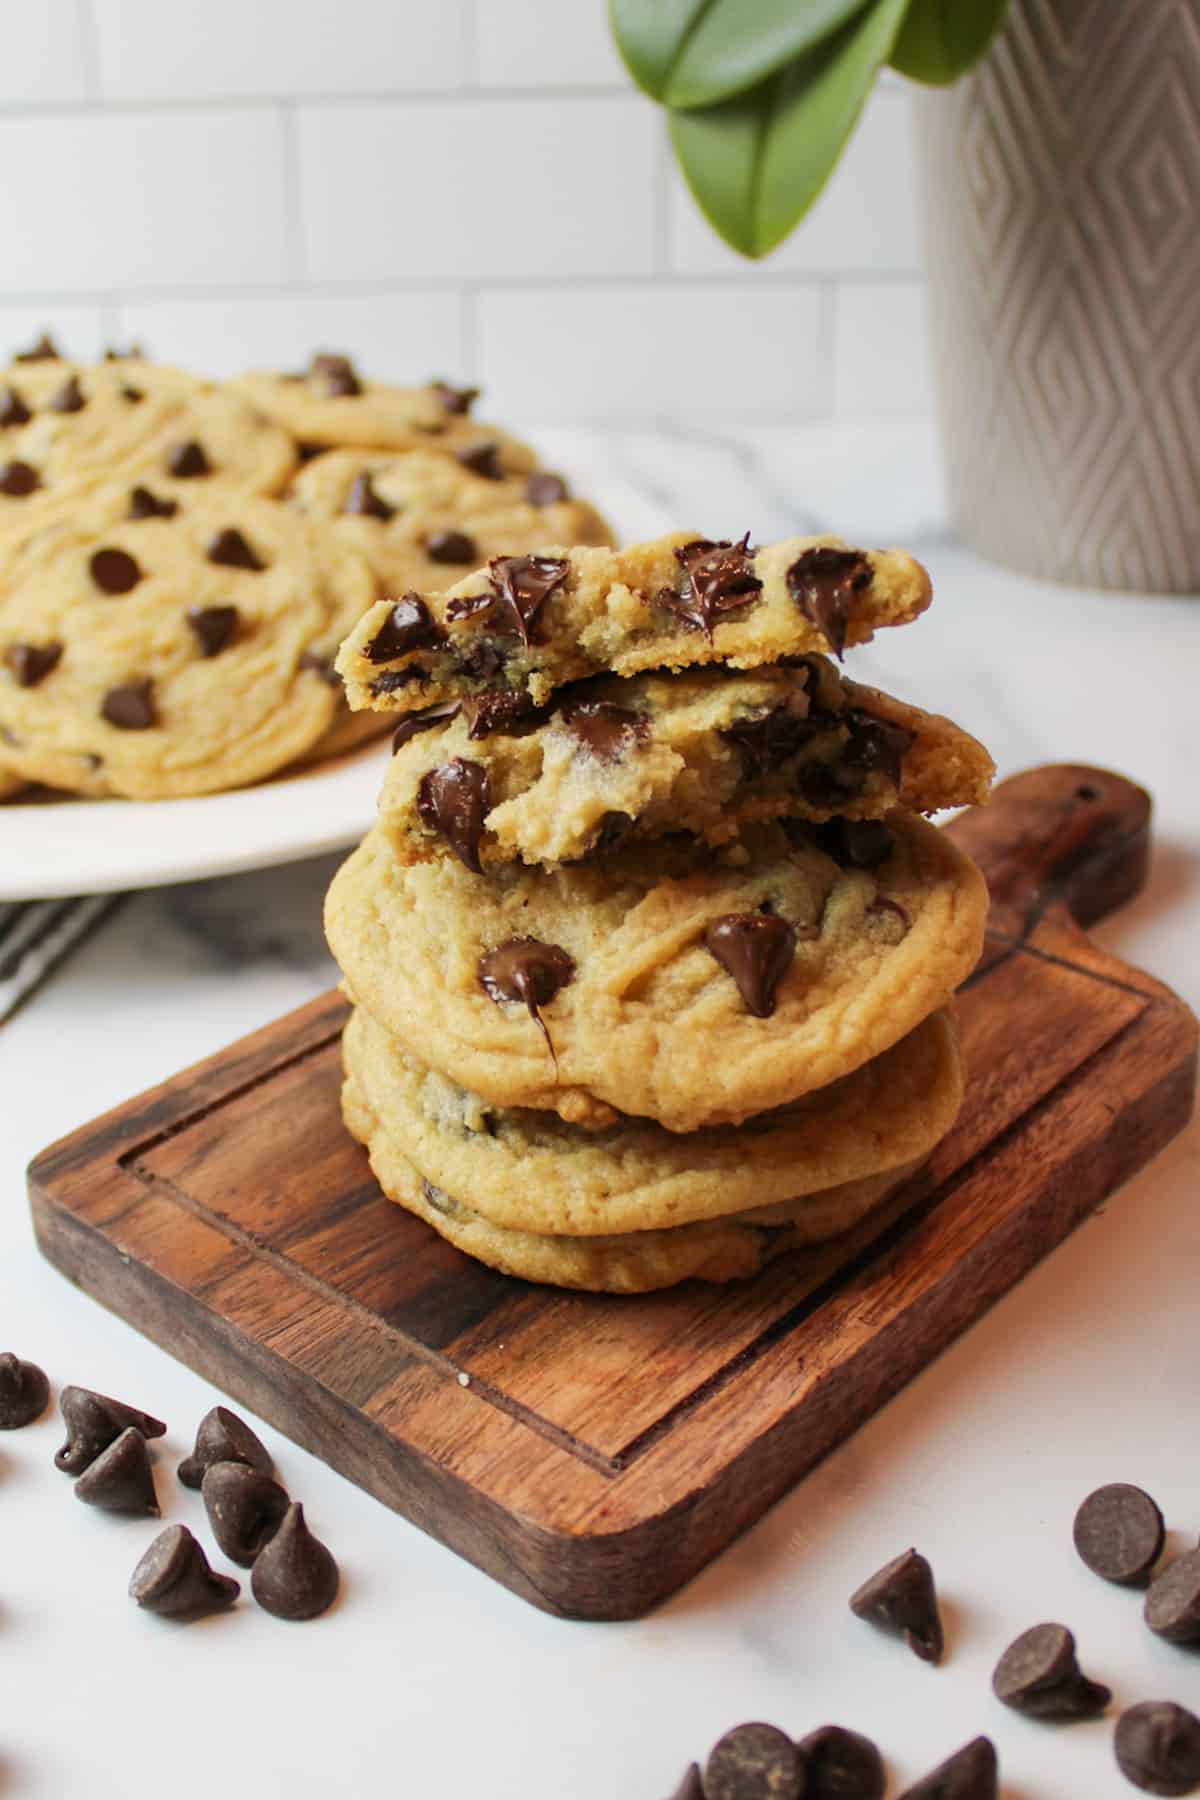 stacked chocolate chip cookies on a wooden boad with the top cookie broken in half